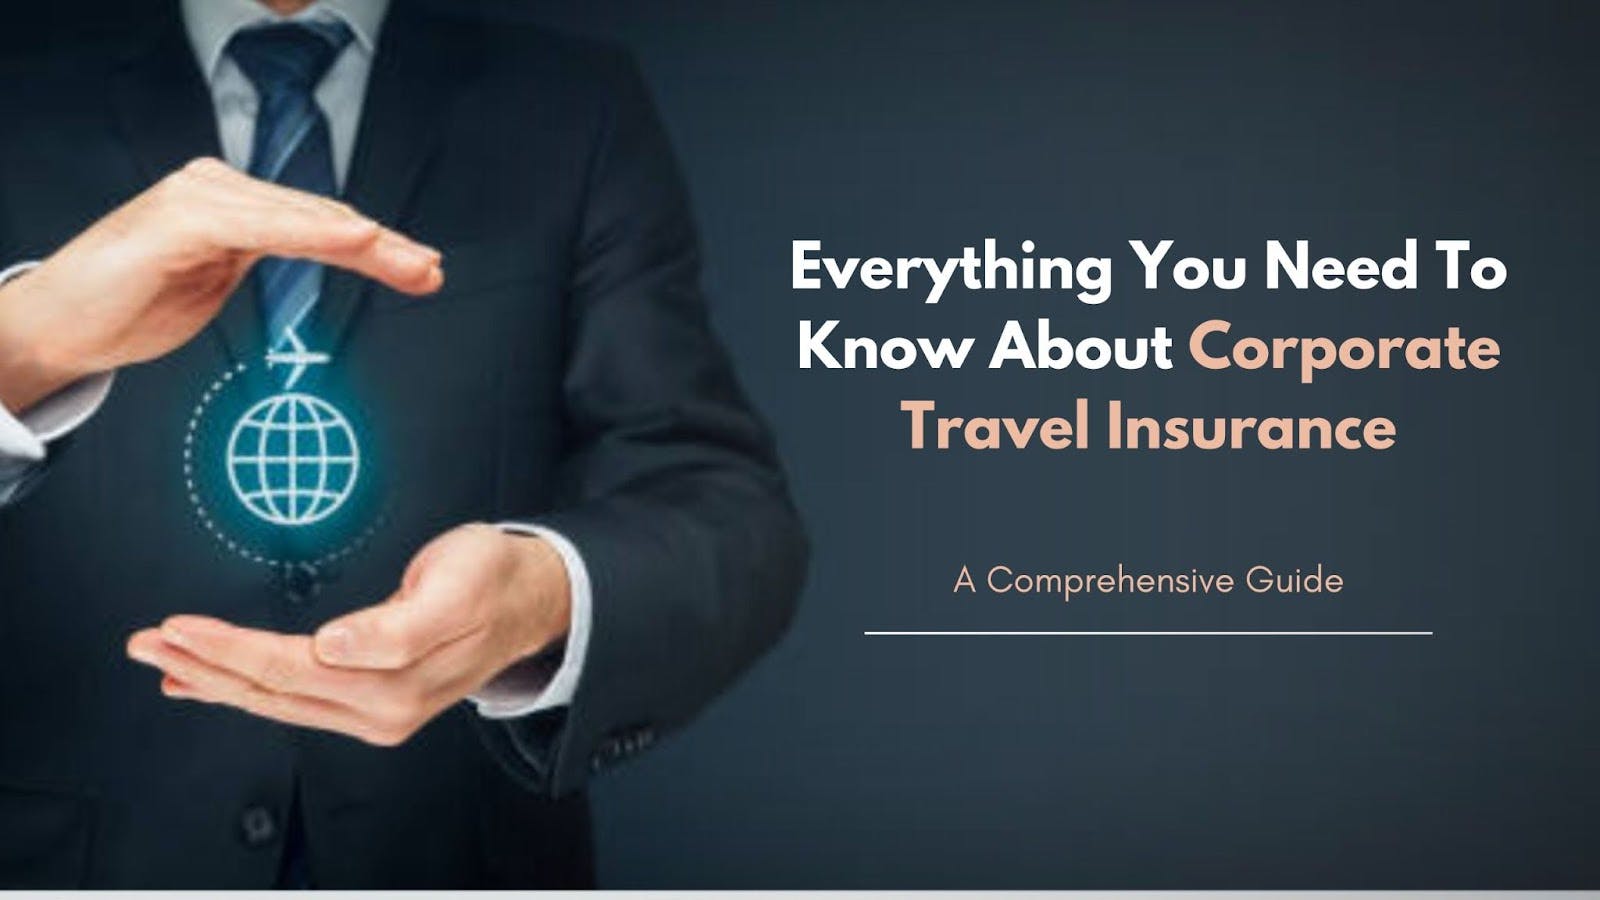 What is Corporate Travel Insurance?